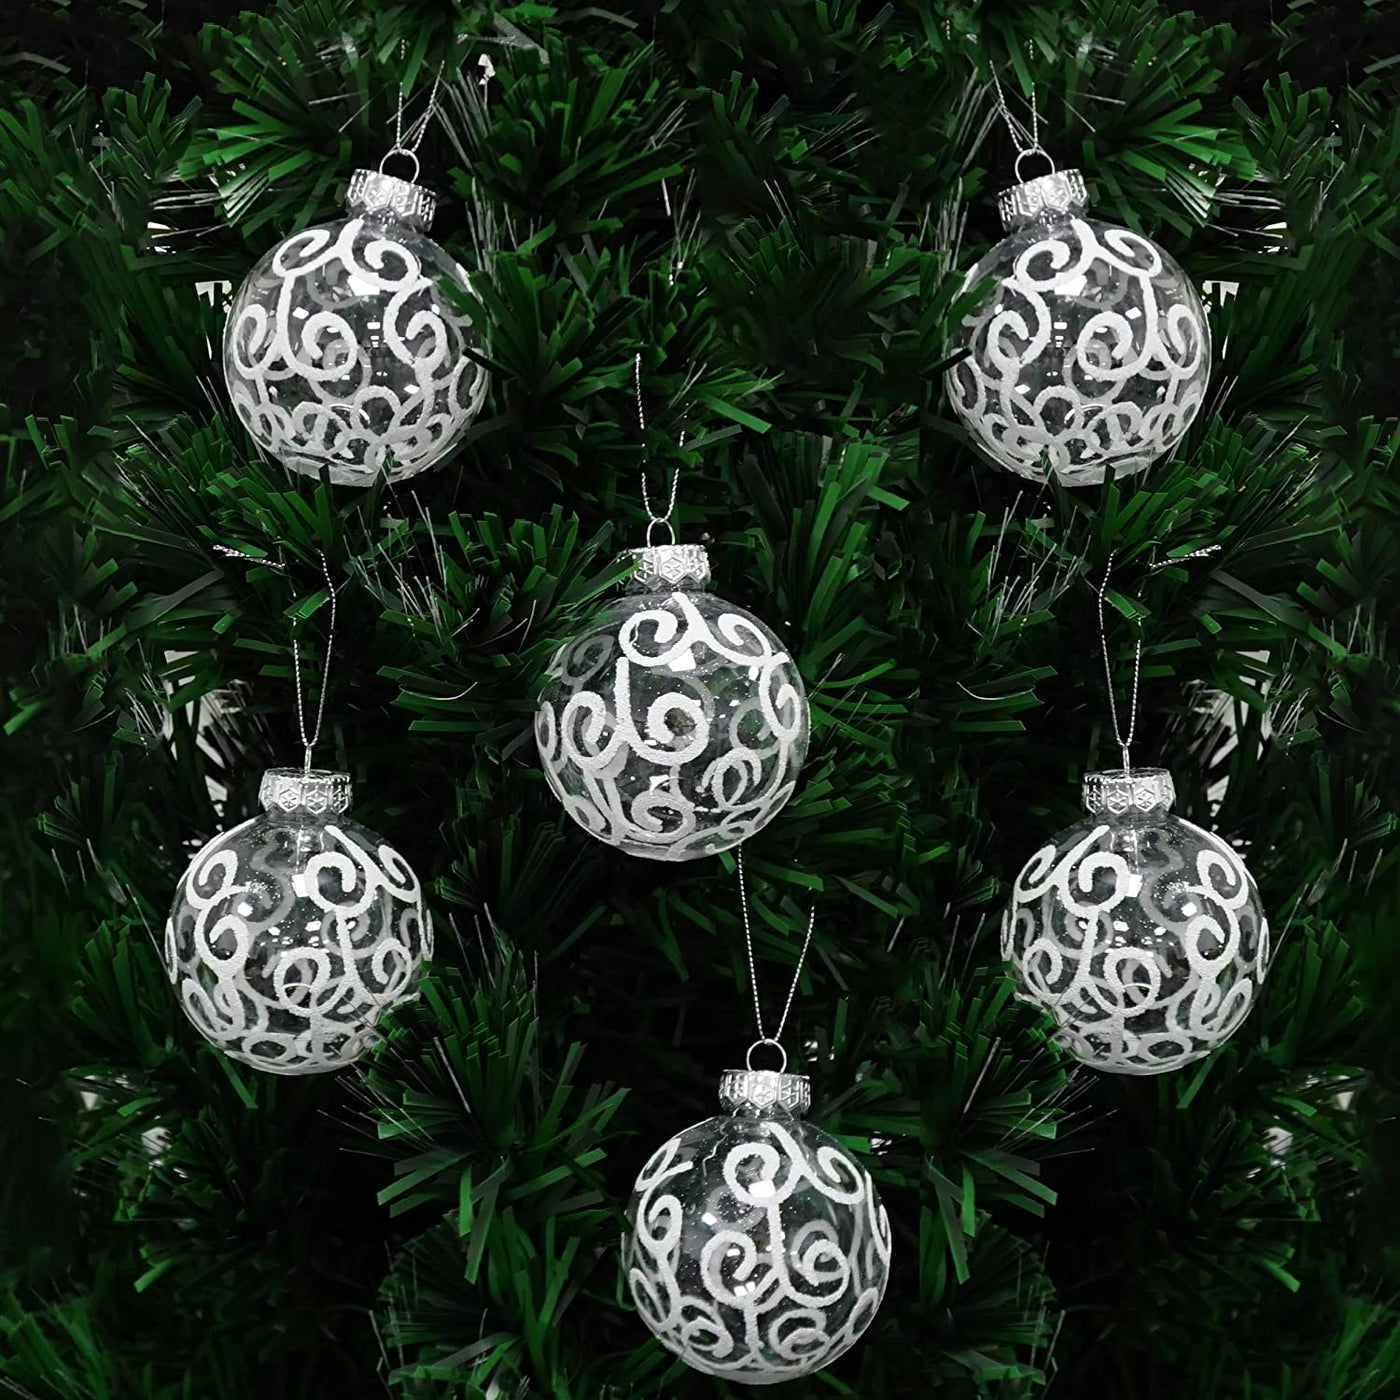 12 Pack White Swirl Christmas Ornaments Shatterproof Plastic 3.15"/80mm Clear Ball Ornaments Decorated with White Glitter for Christmas Tree Decorations by 4E's Novelty